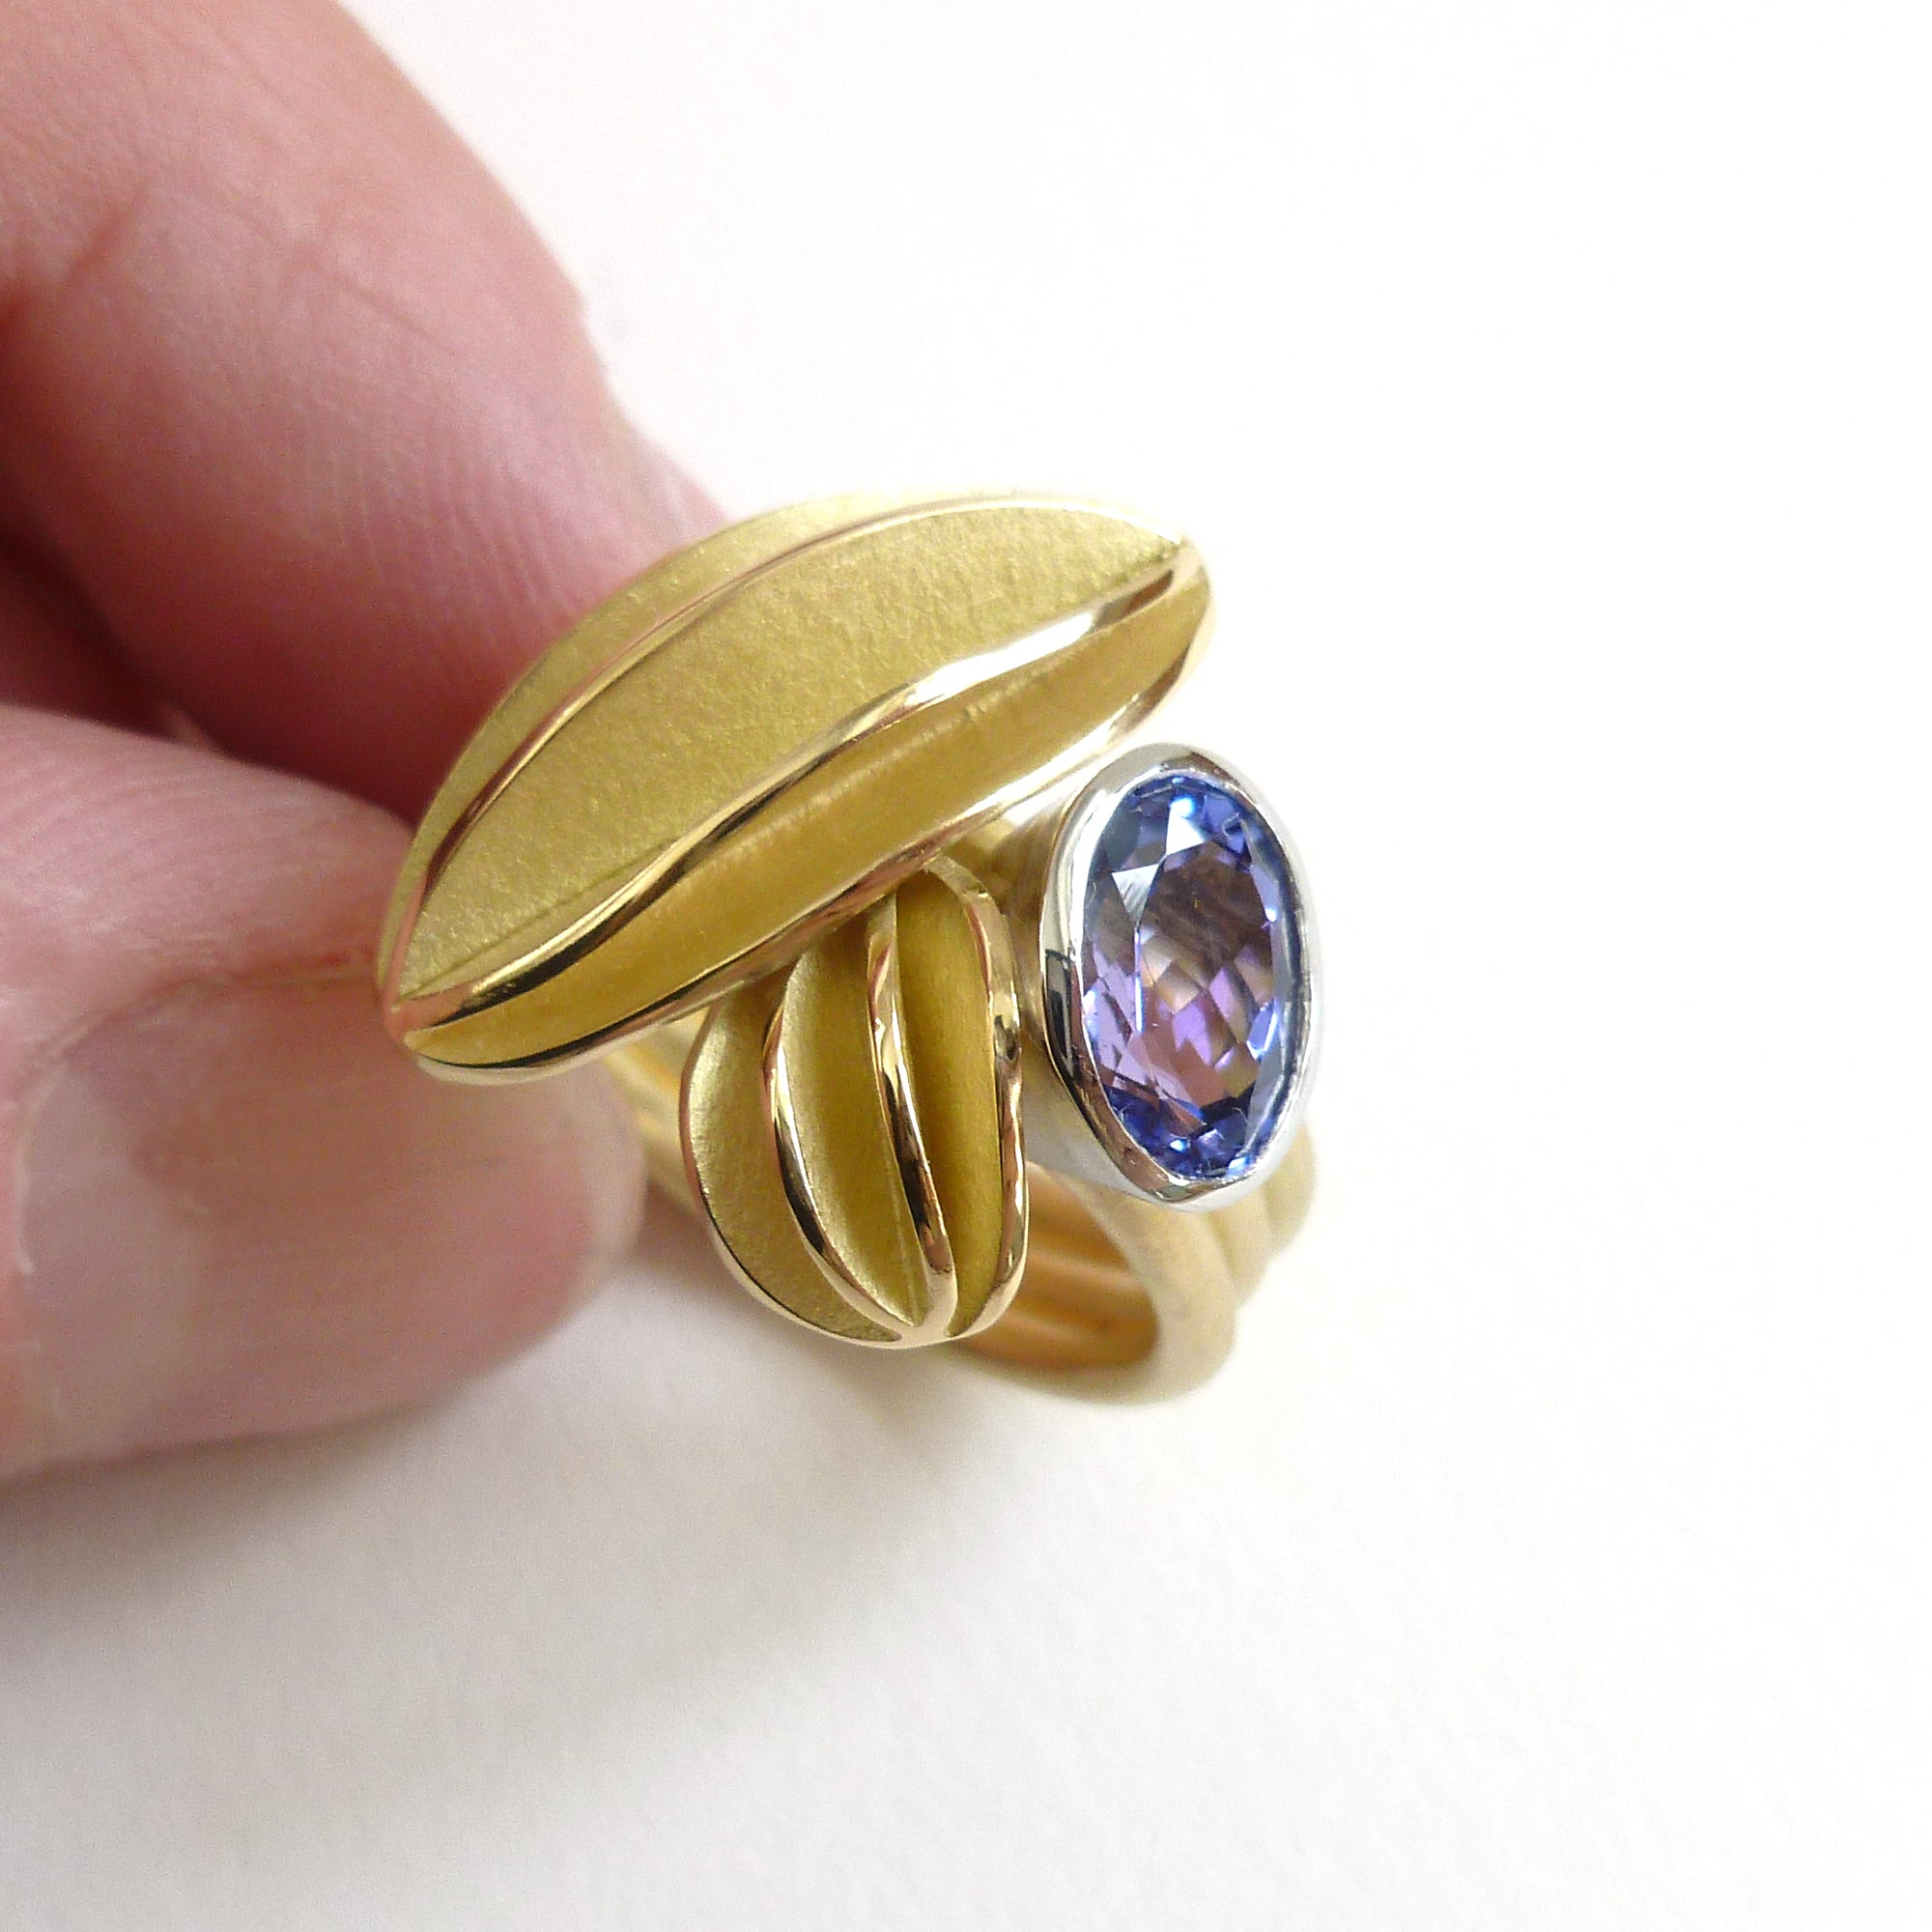 Unique contemporary gold, platinum and tanzanite ring with gold leaf shape detail